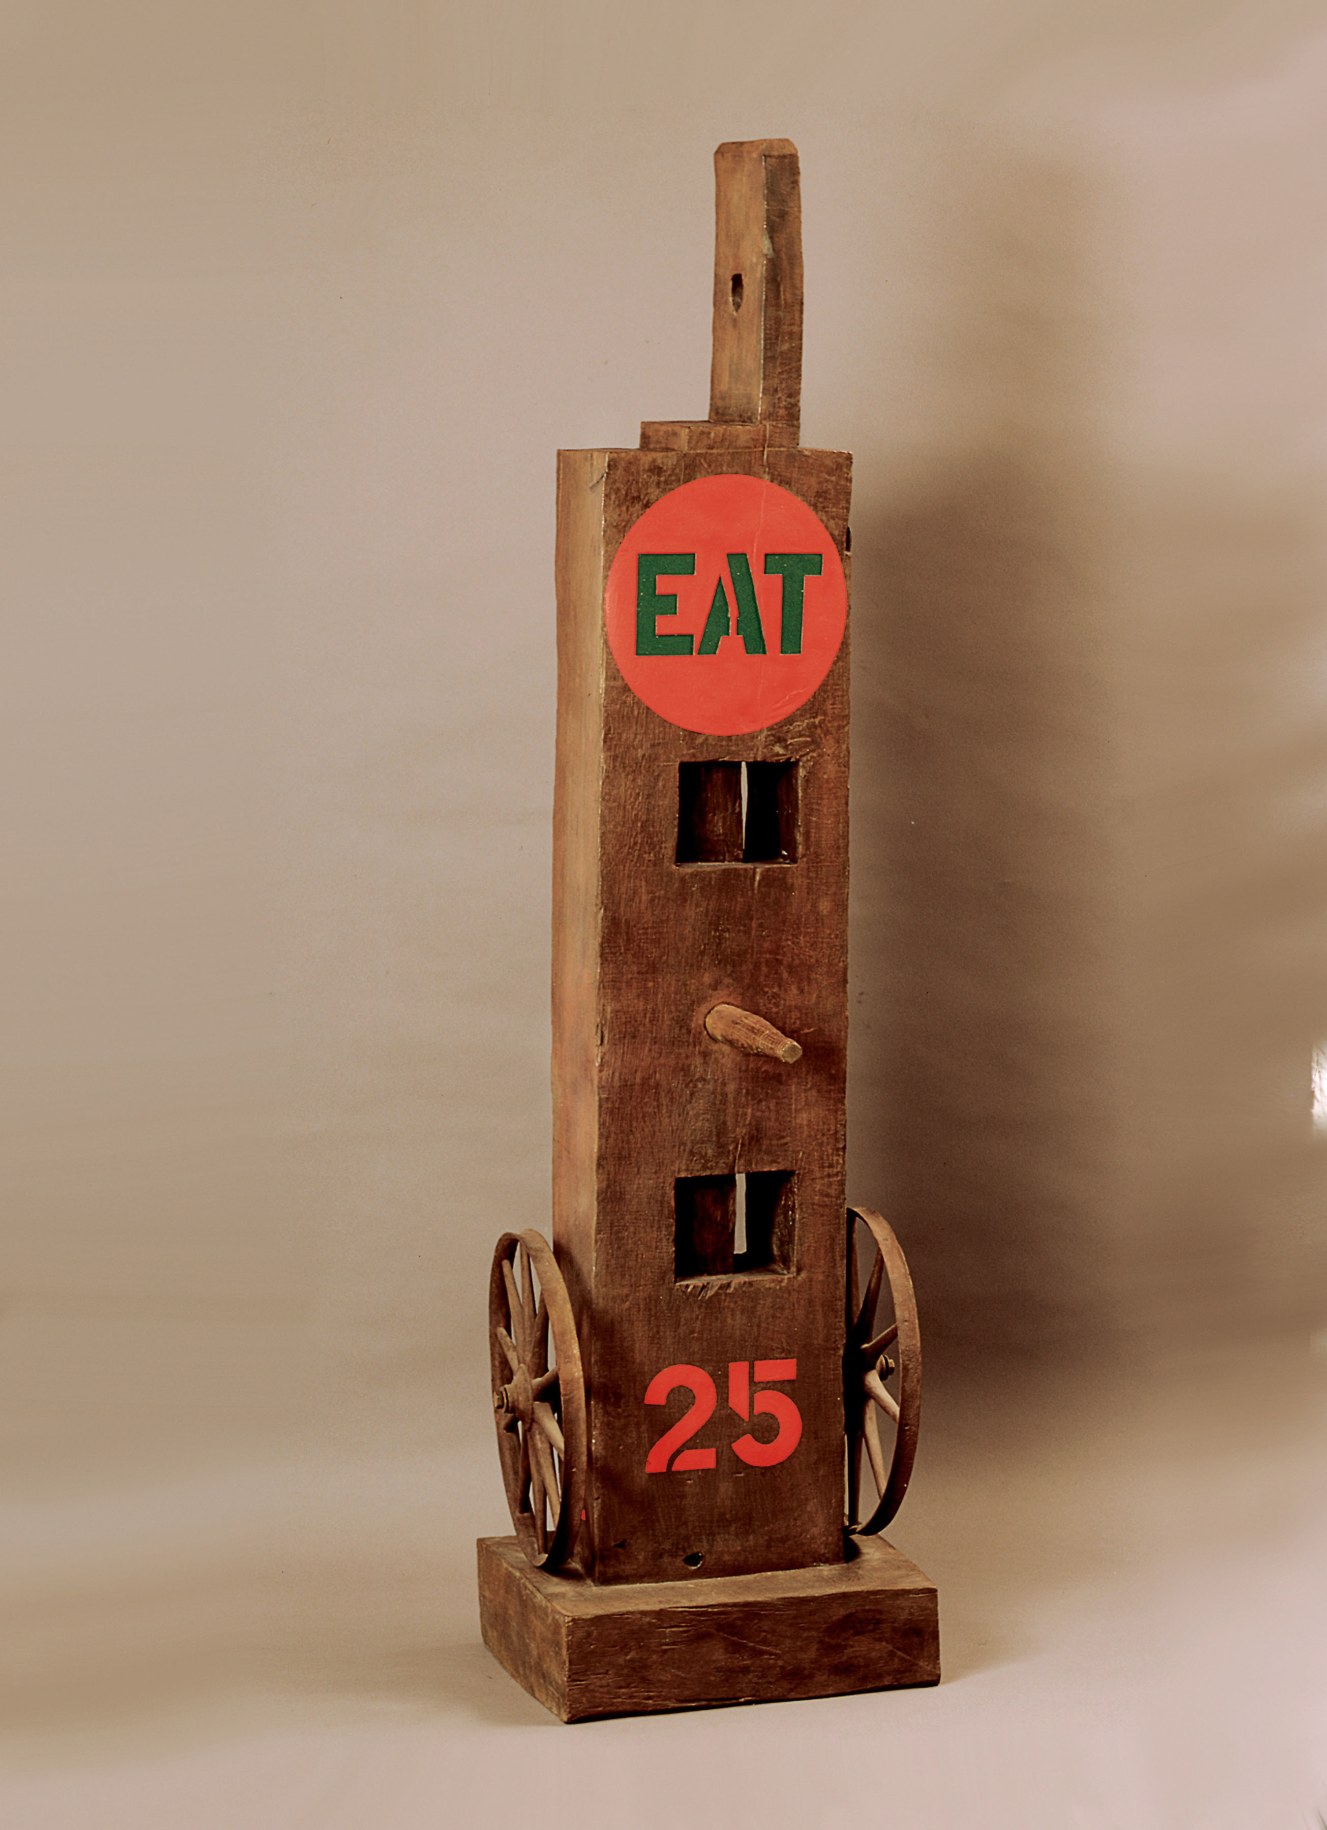 Eat is a 60 by 15 1/2 by 17 inch sculpture consisting of a wooden beam with a haunched tenon, standing on a wooden base. An iron and wooden wheel is affixed to the right and left sides at the bottom of the sculpture. In between a red number 25 has been painted. A wooden peg protrudes from the center of the sculpture, and at the top of the sculpture is a red circle containing the word &quot;eat&quot; painted in green stenciled letters.